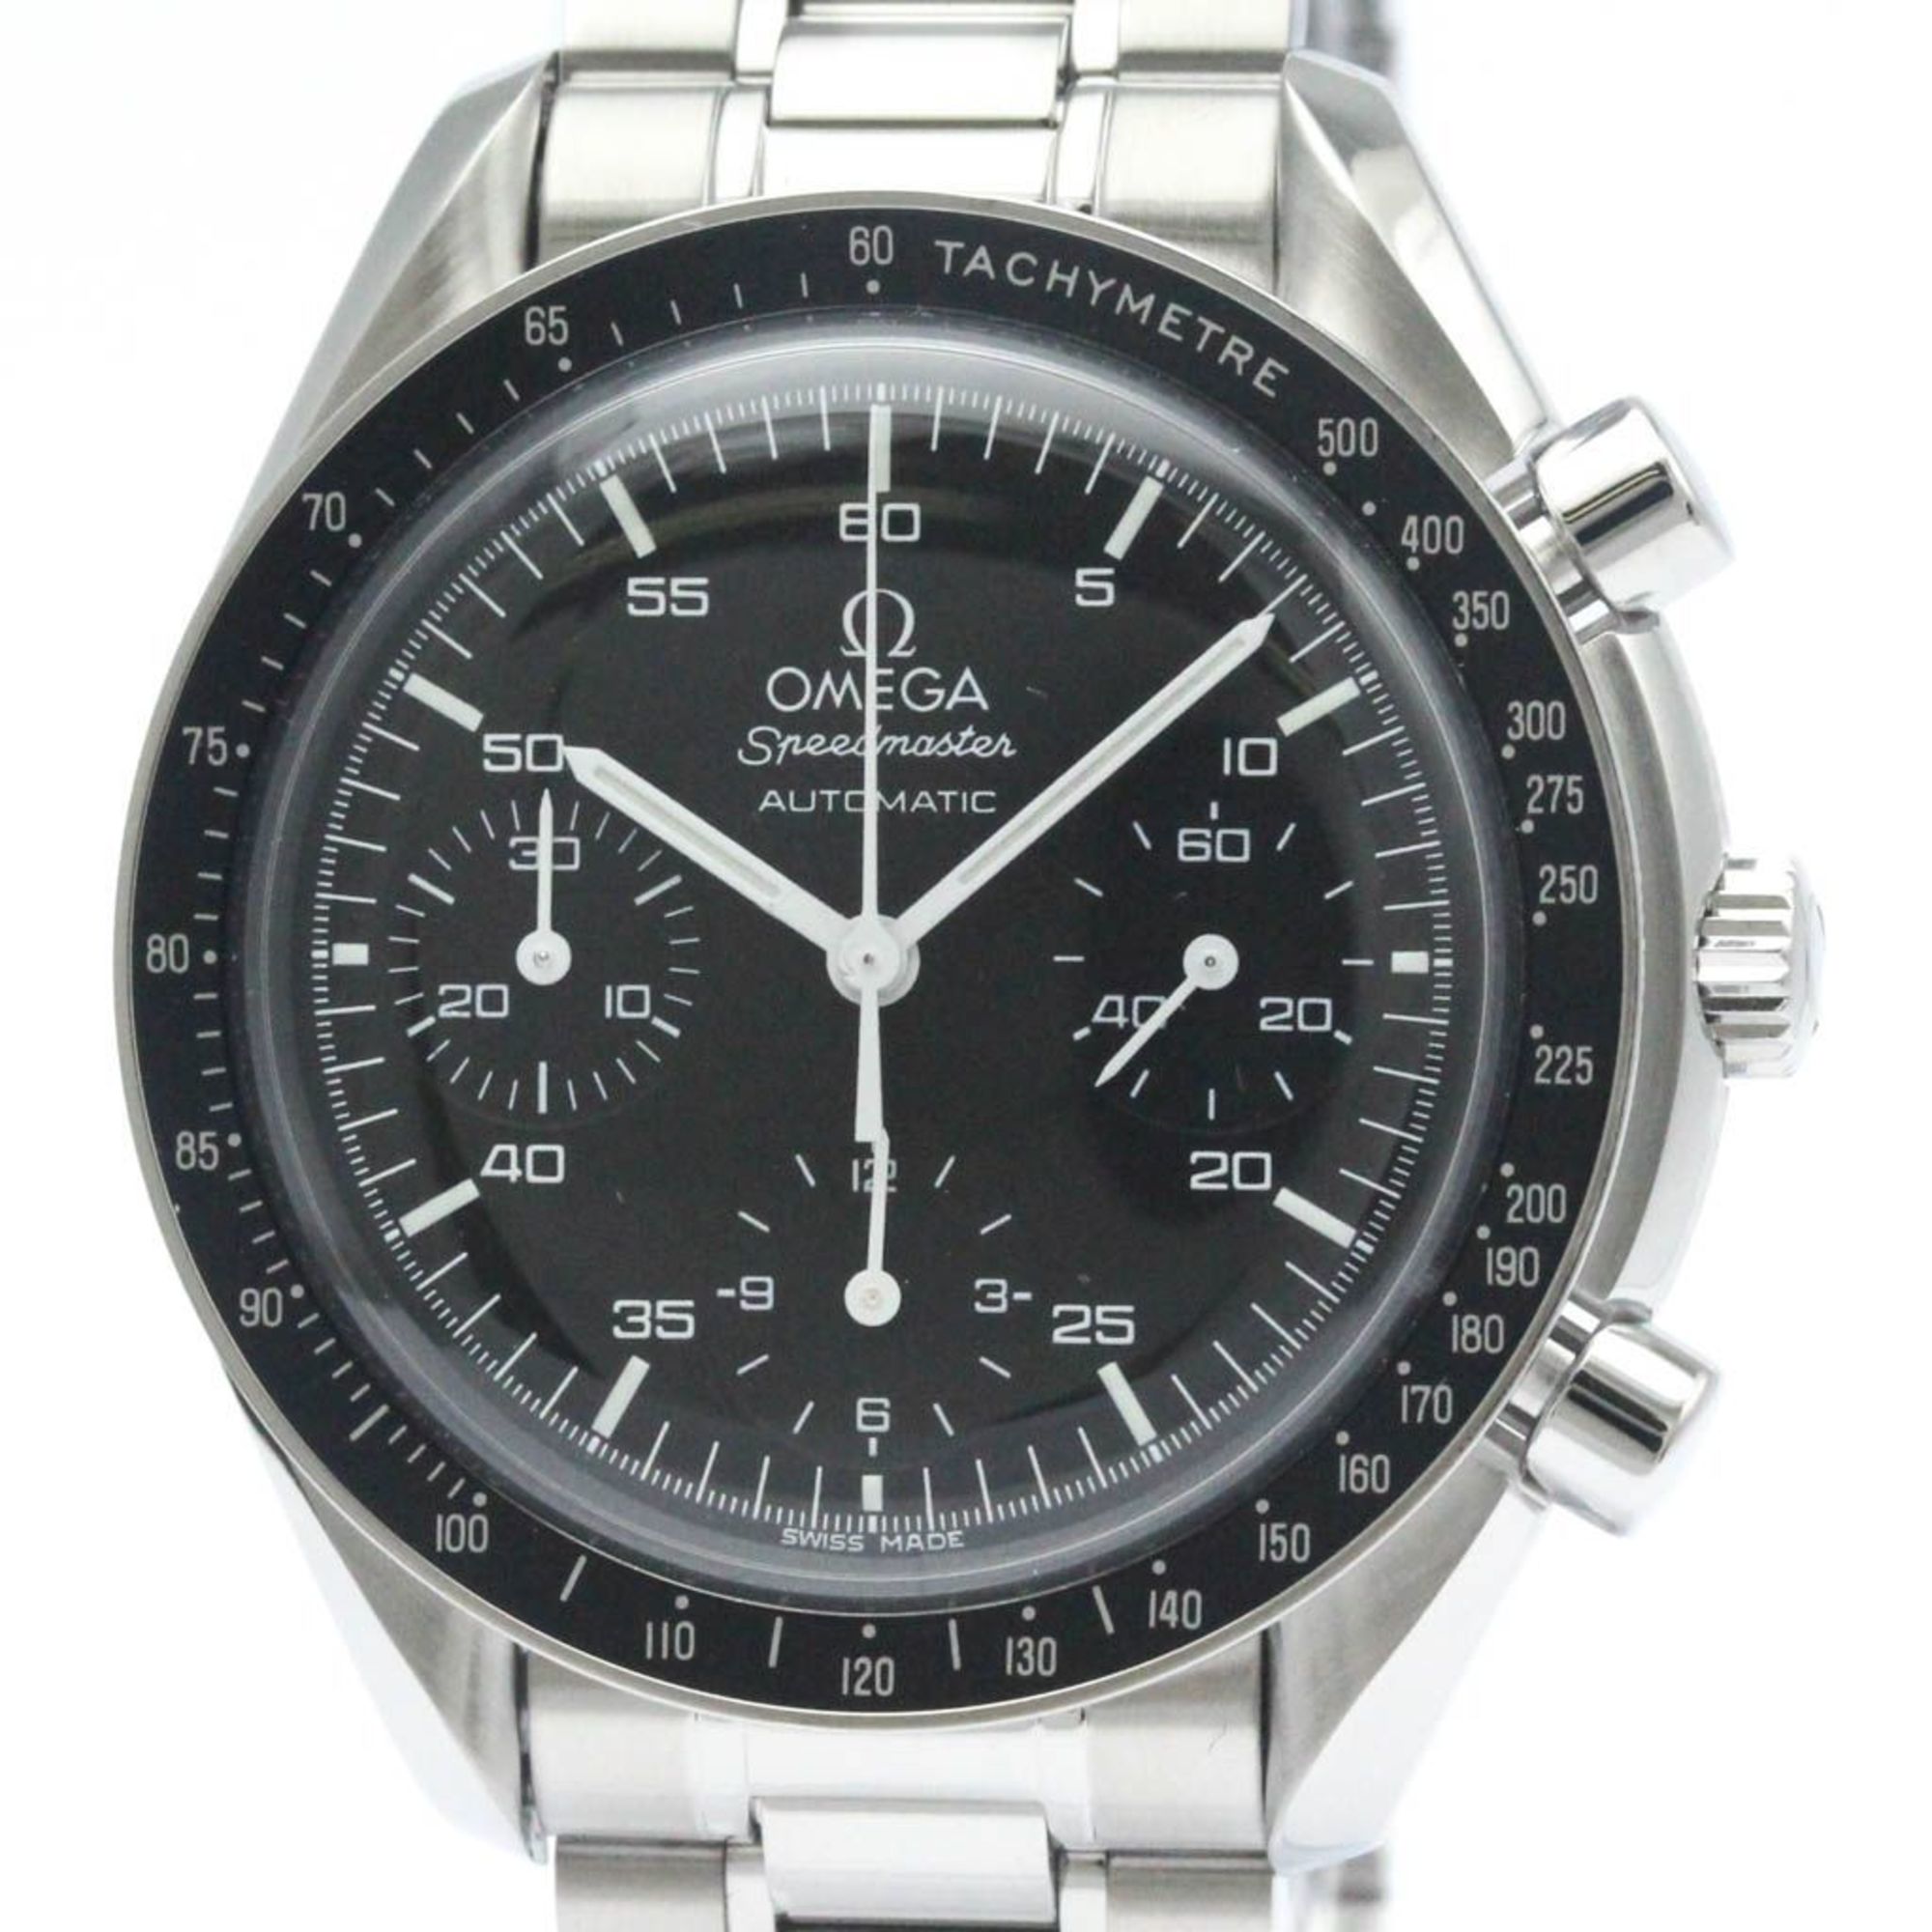 Polished OMEGA Speedmaster Automatic Steel Mens Watch 3510.50 BF567934